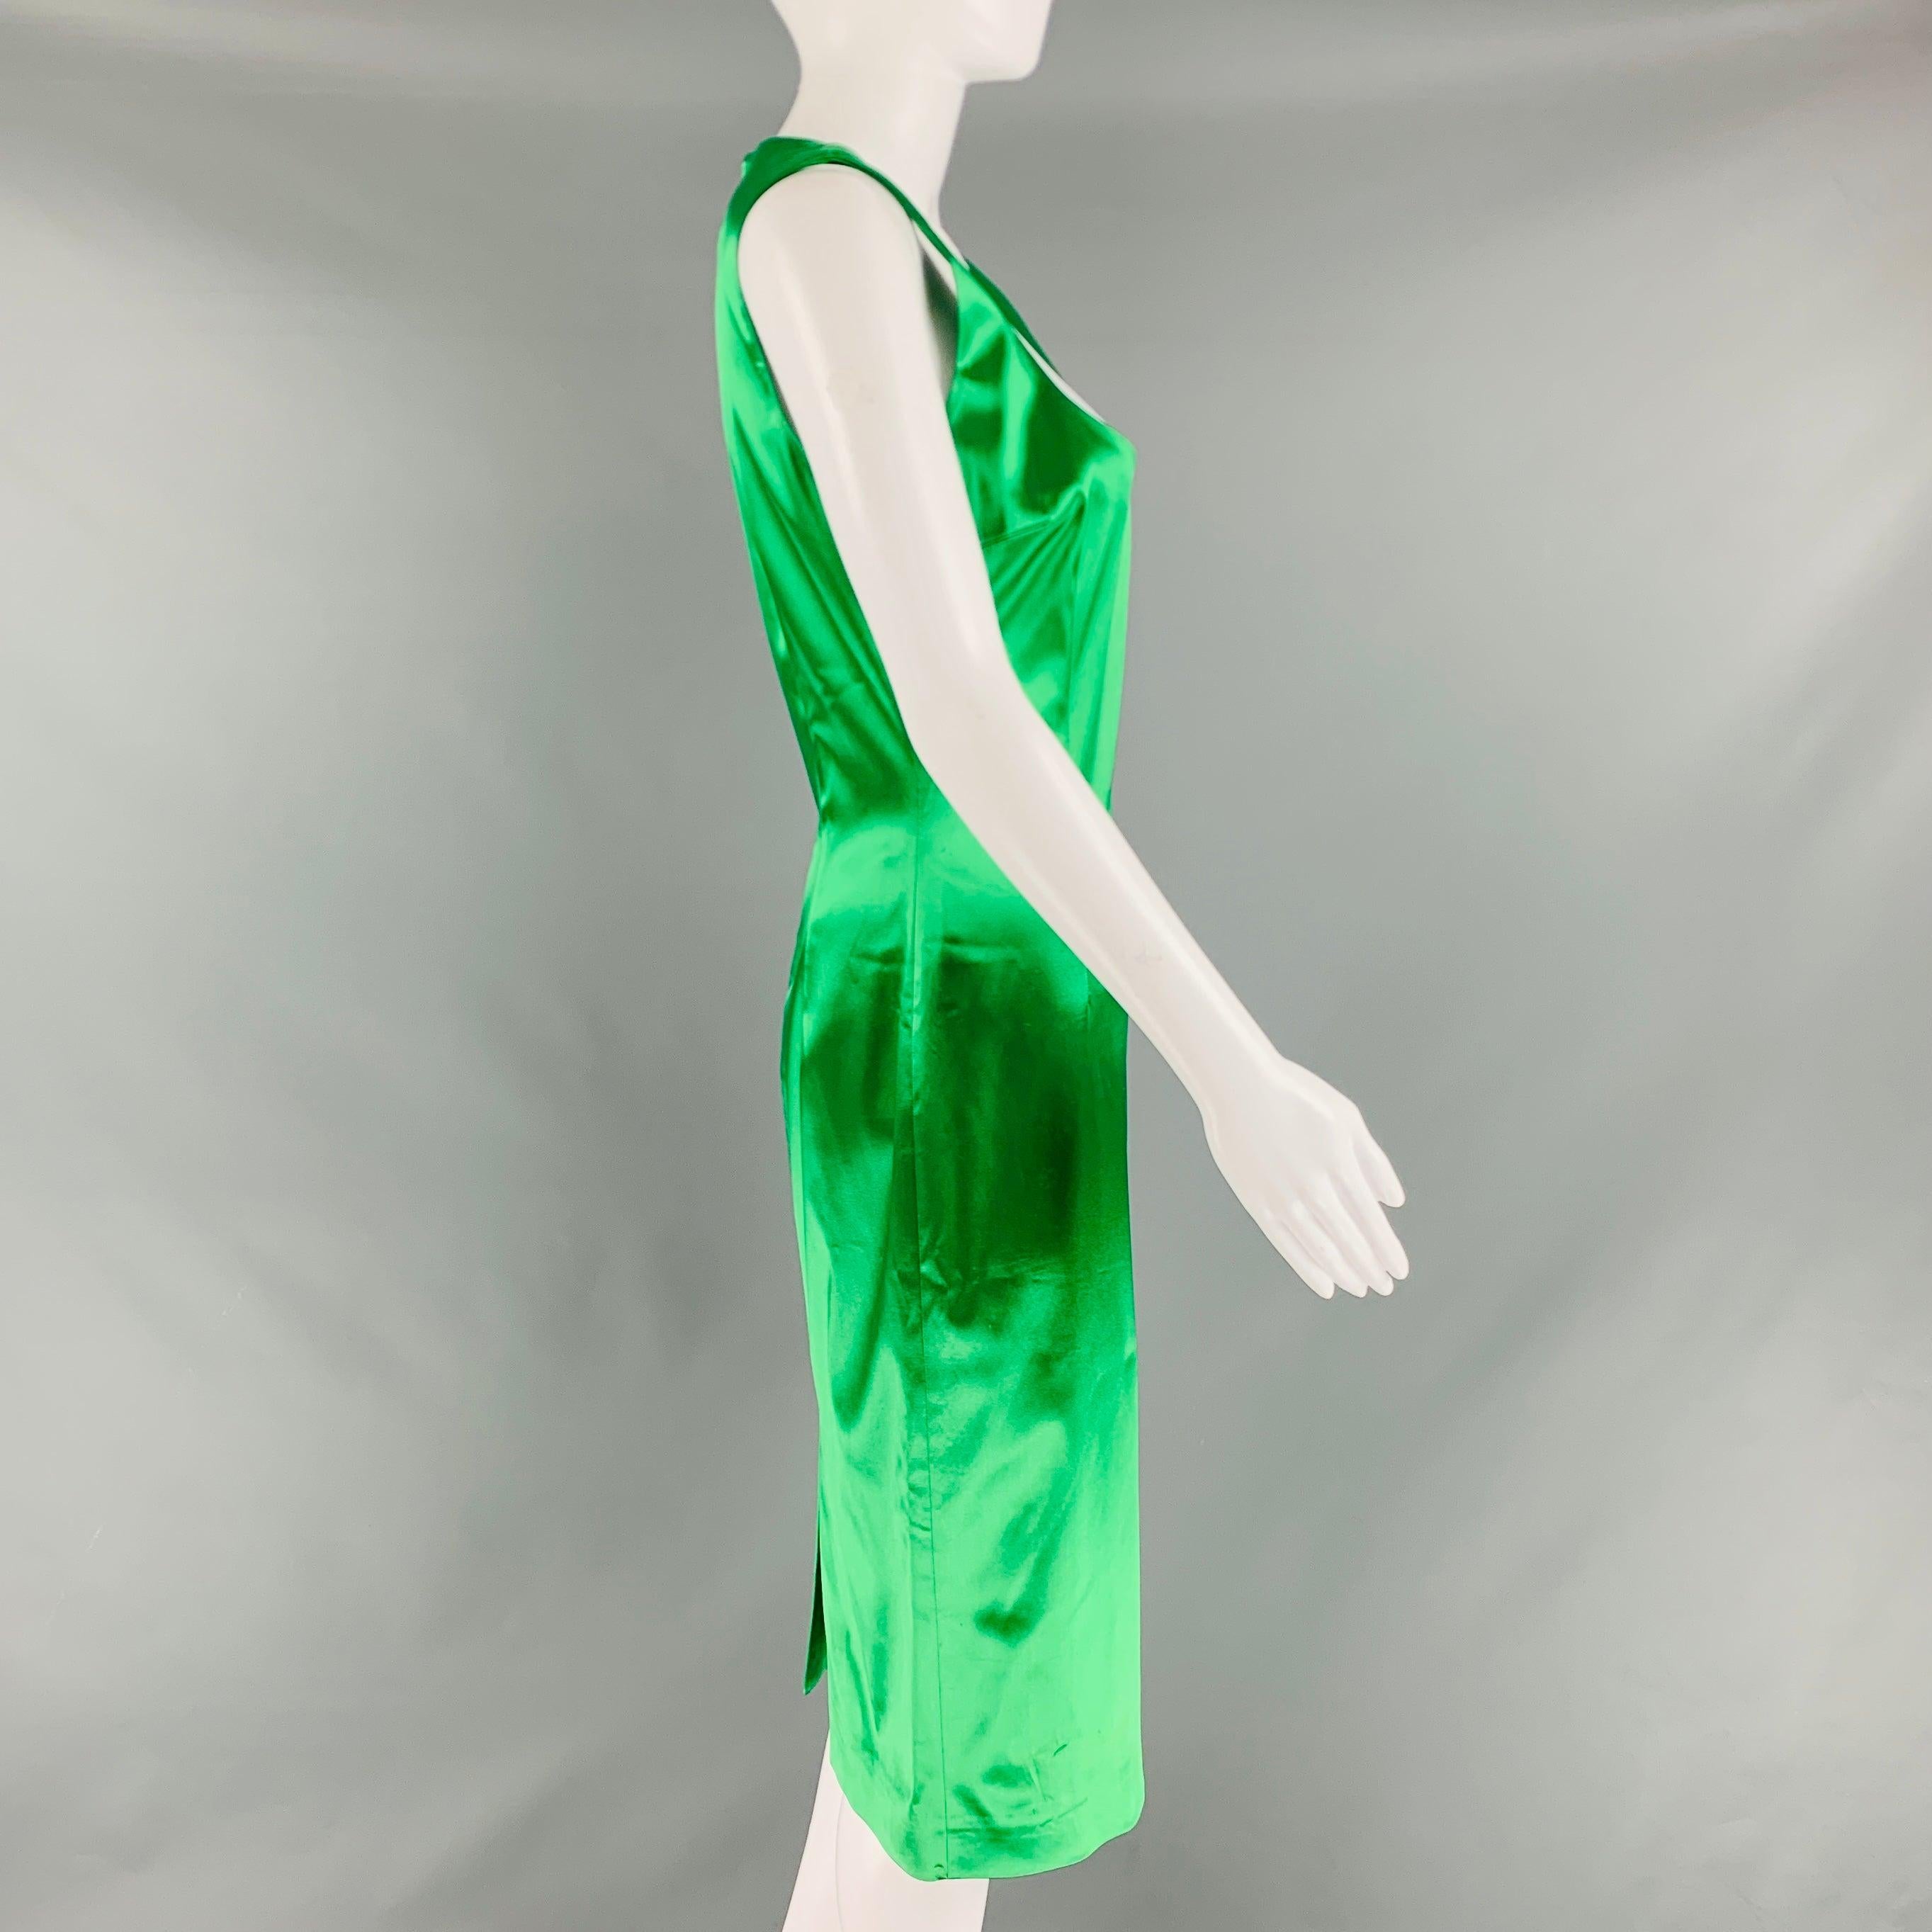 DOLCE & GABBANA cocktail dress comes in an emerald green acetate blend with an animal print interior featuring, back slit, sleeveless, and a back zip up closure. Made in Italy.Very Good Pre-Owned Condition. Moderate piling. 

Marked:   44